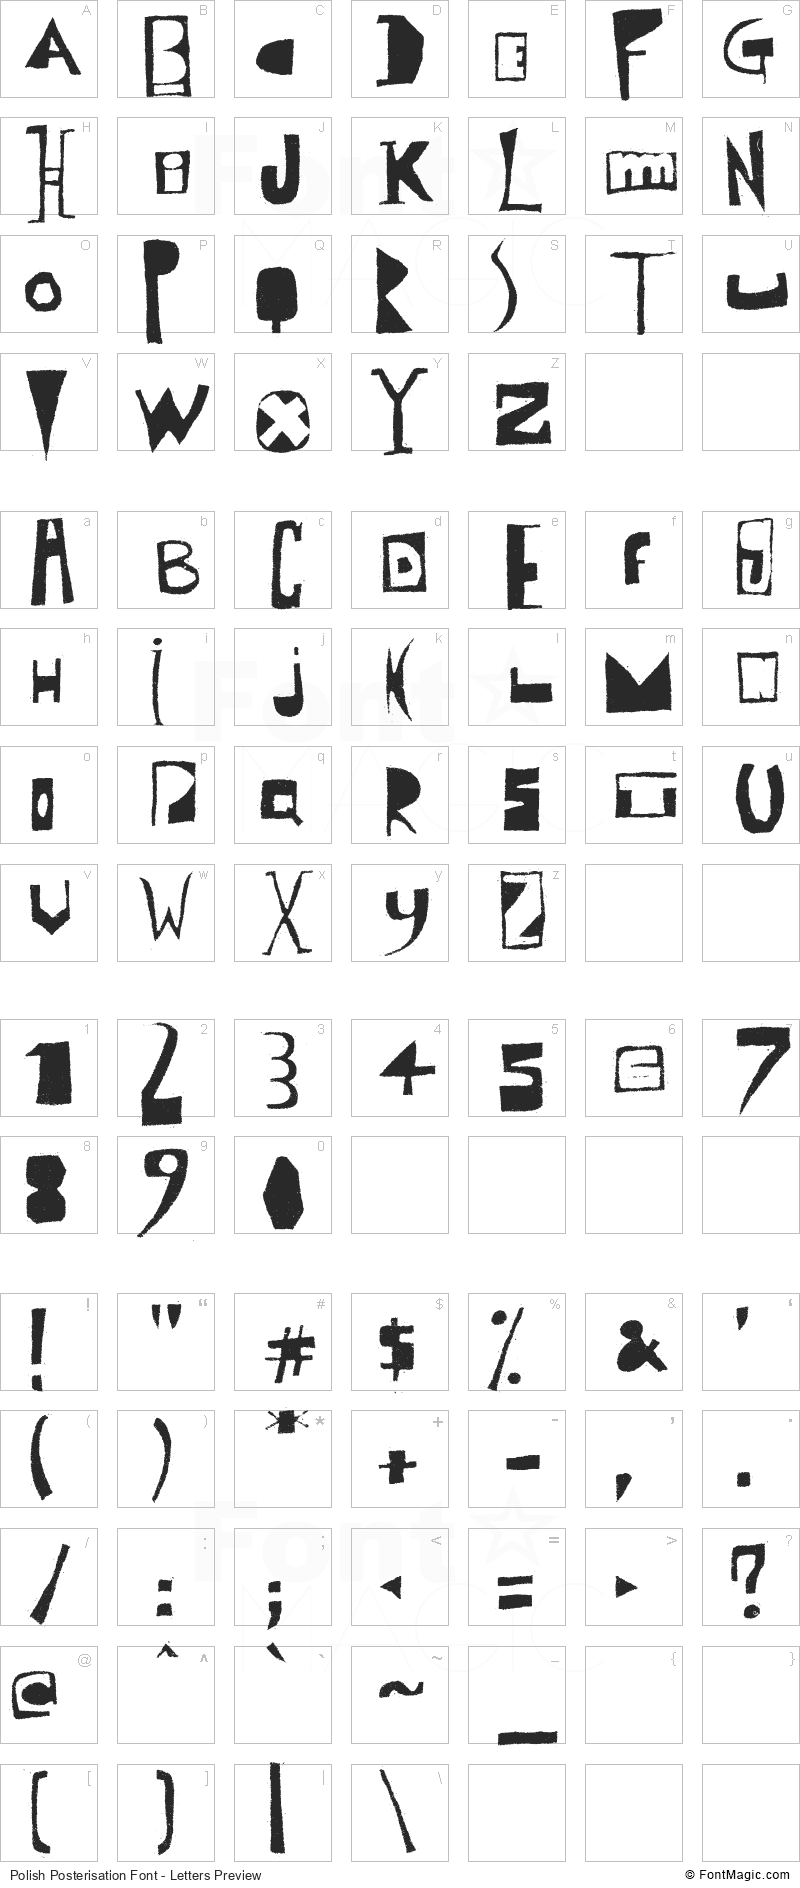 Polish Posterisation Font - All Latters Preview Chart